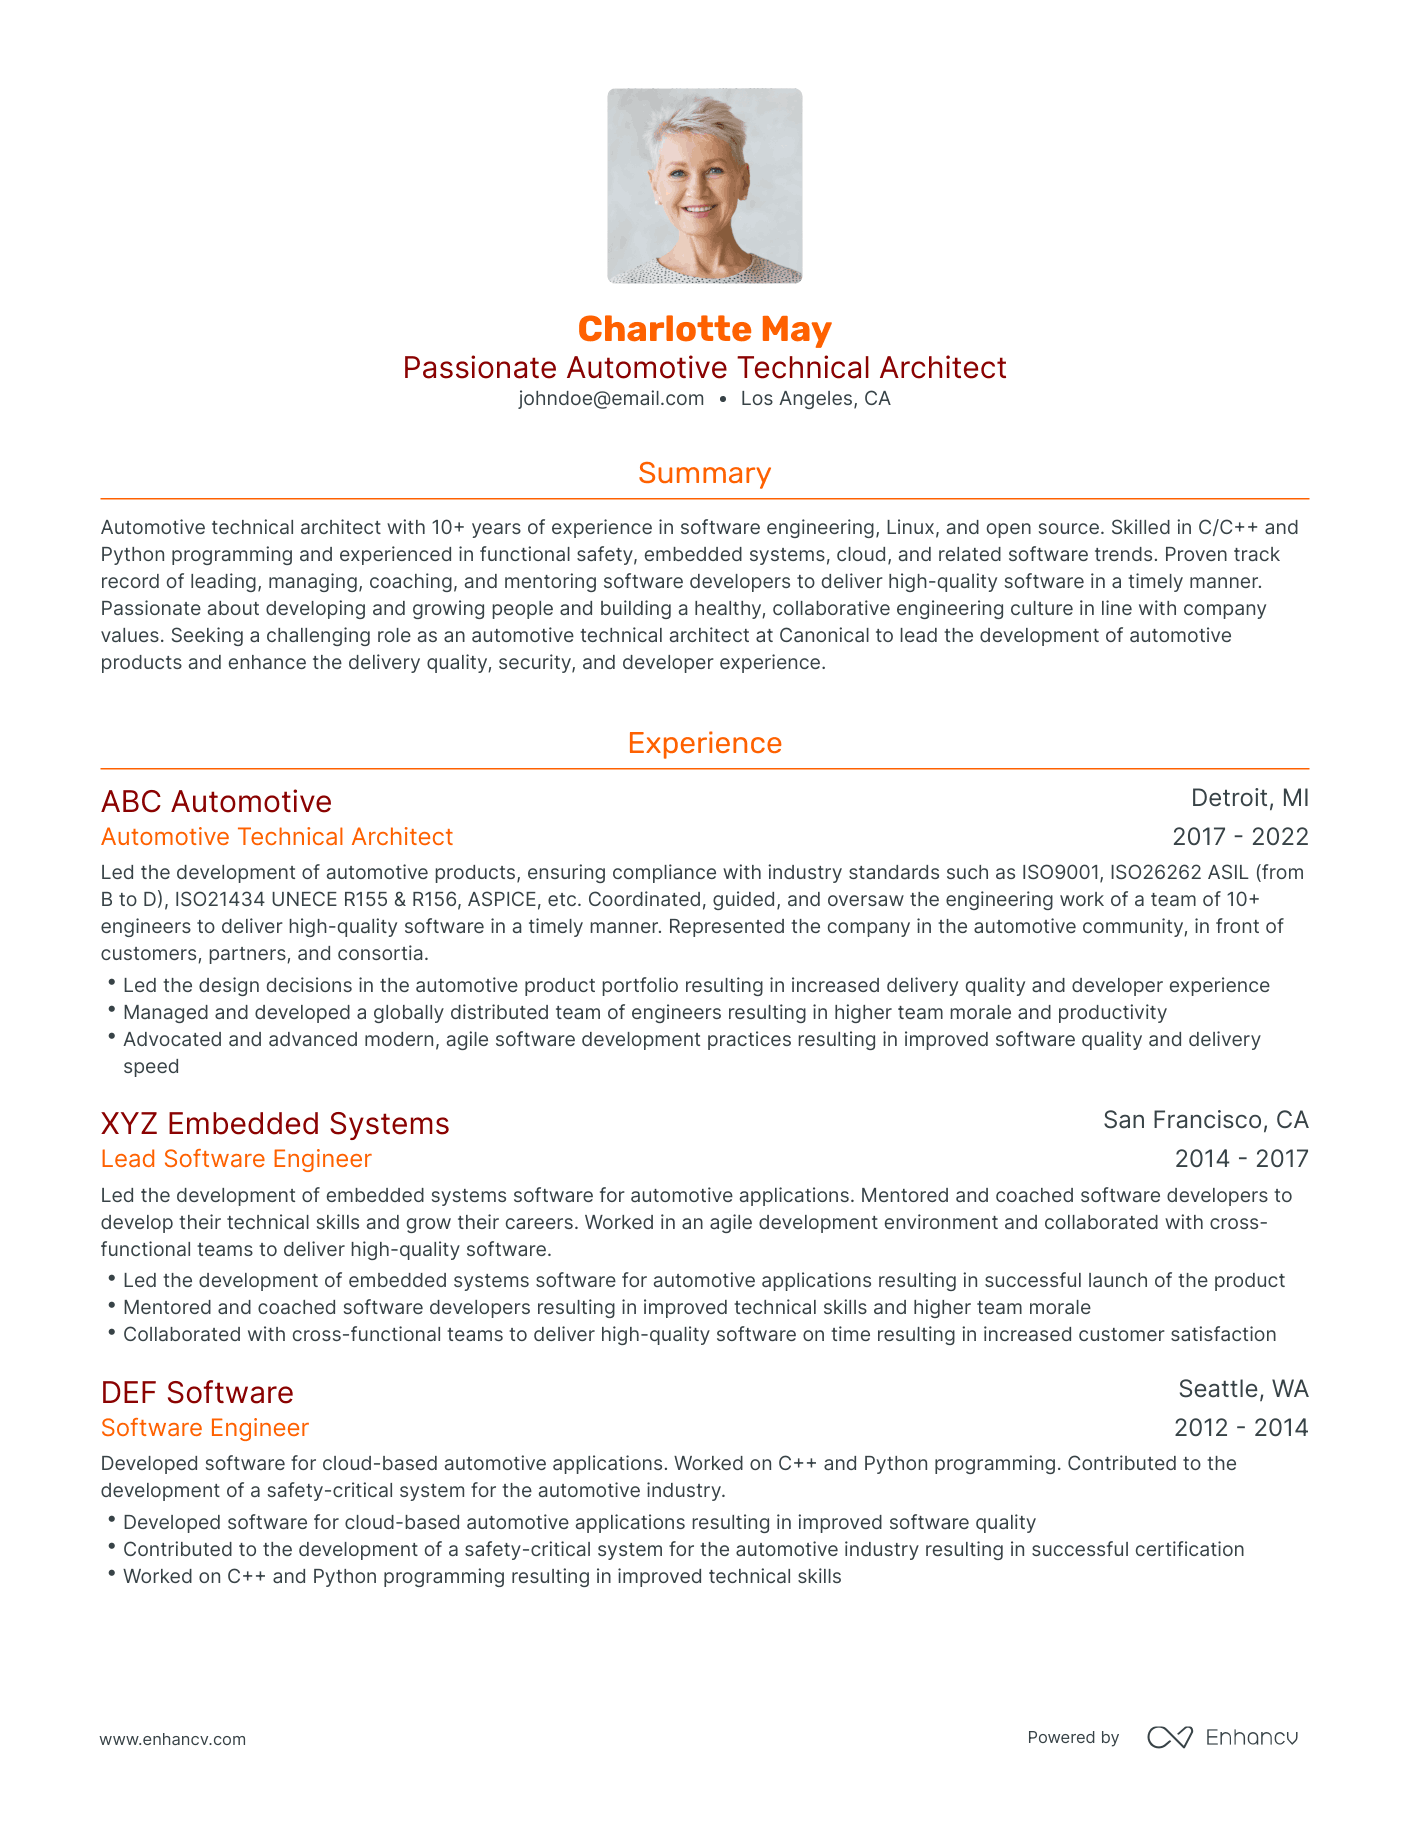 Traditional Automotive Engineering Resume Template